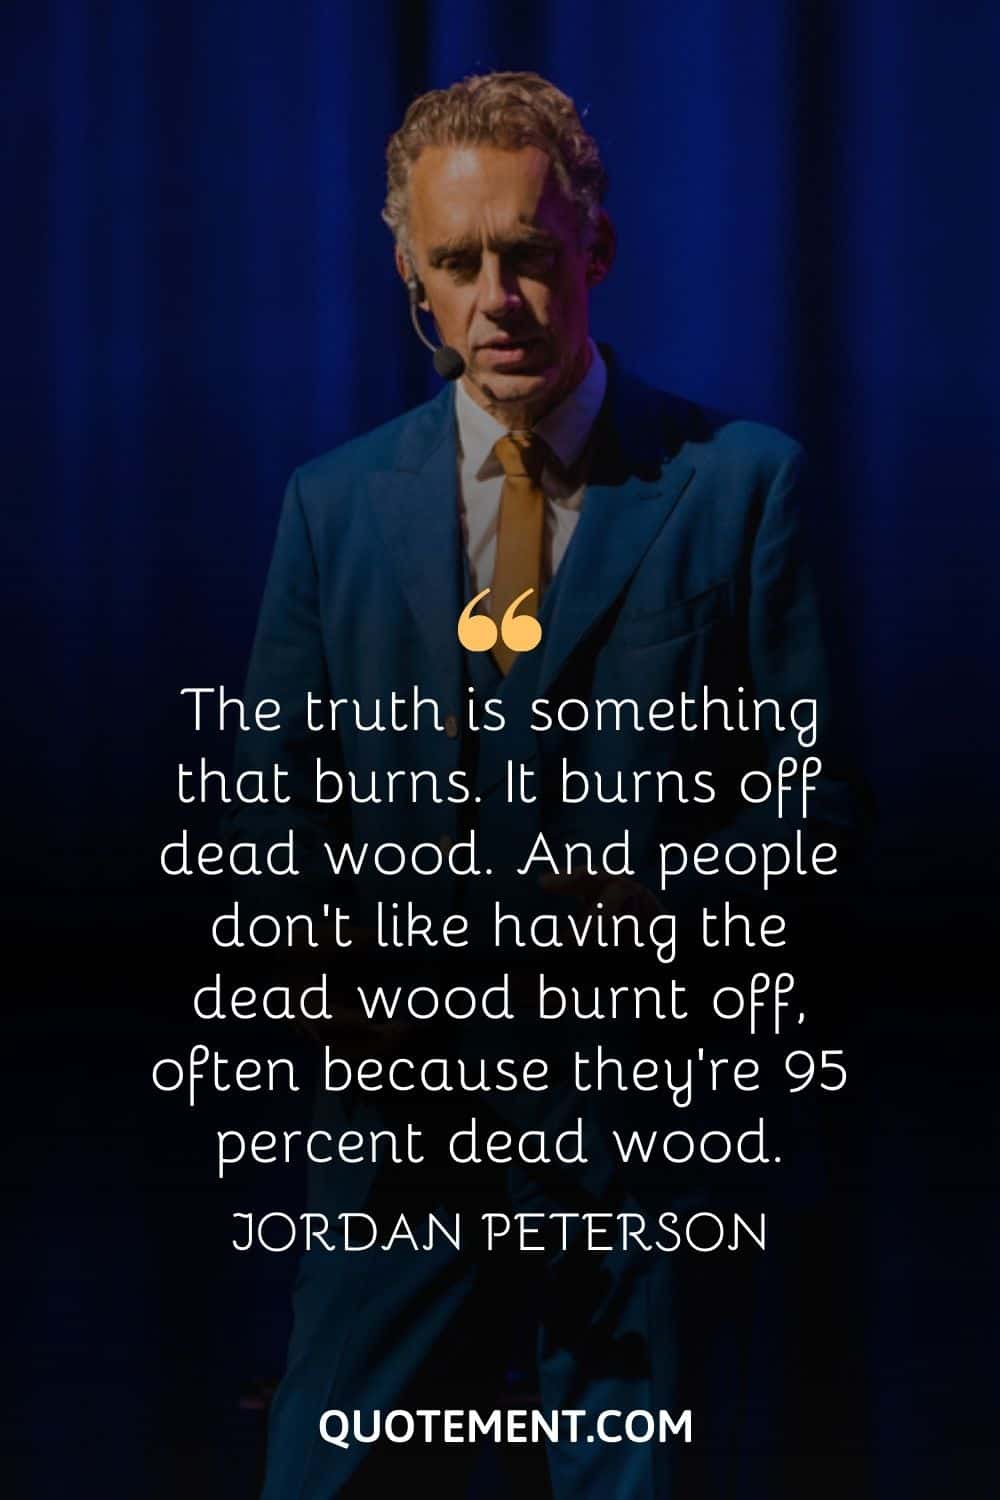 “The truth is something that burns. It burns off dead wood. And people don't like having the dead wood burnt off, often because they're 95 percent dead wood.” — Jordan Peterson